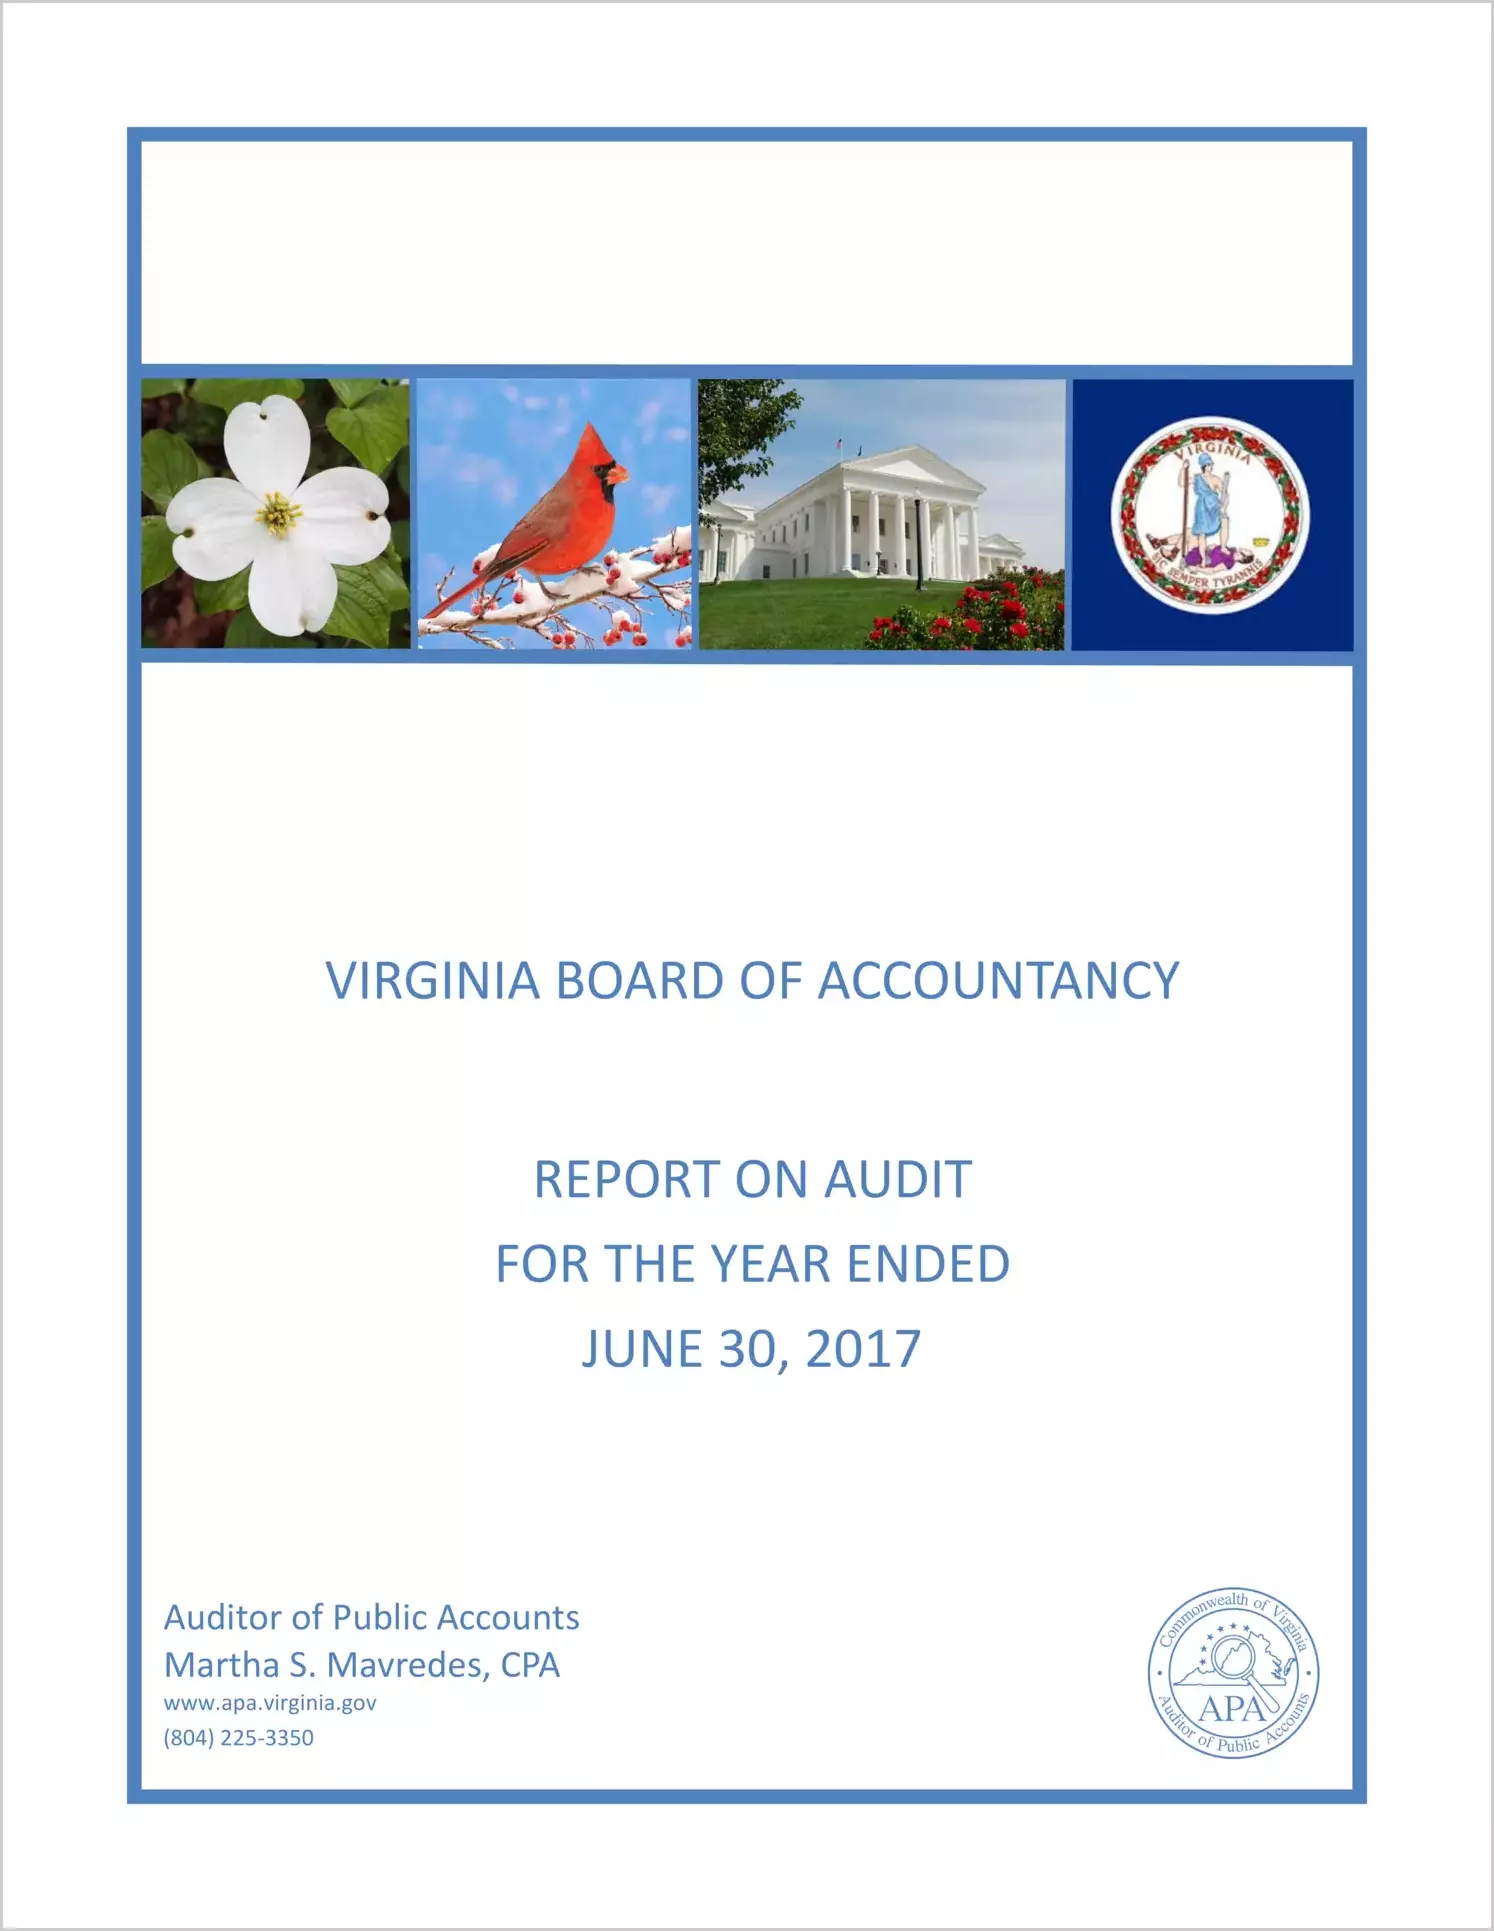 Virginia Board of Accountancy for the year ended June 30, 2017